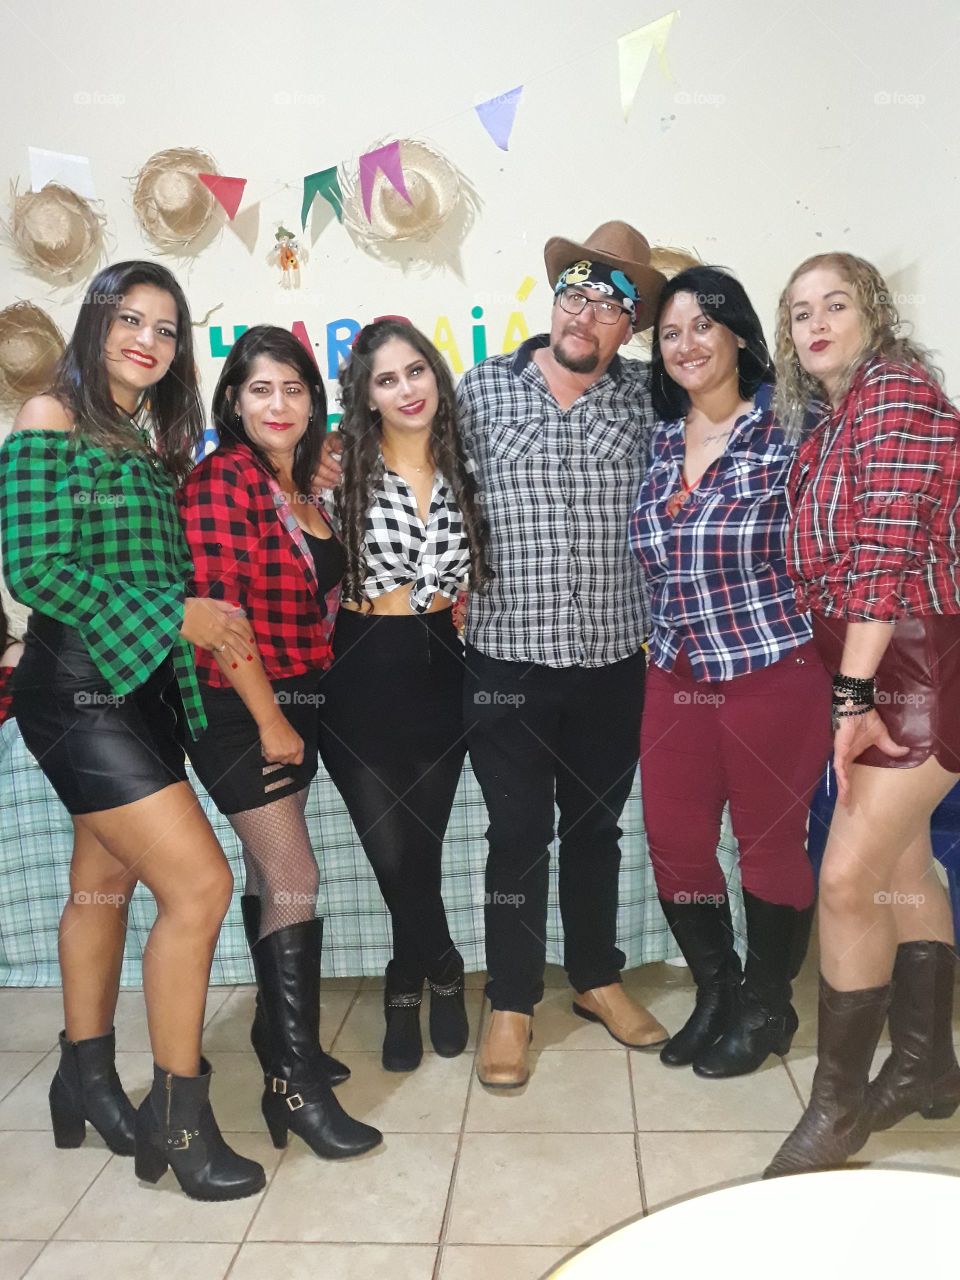 my family dressed as a square dance party